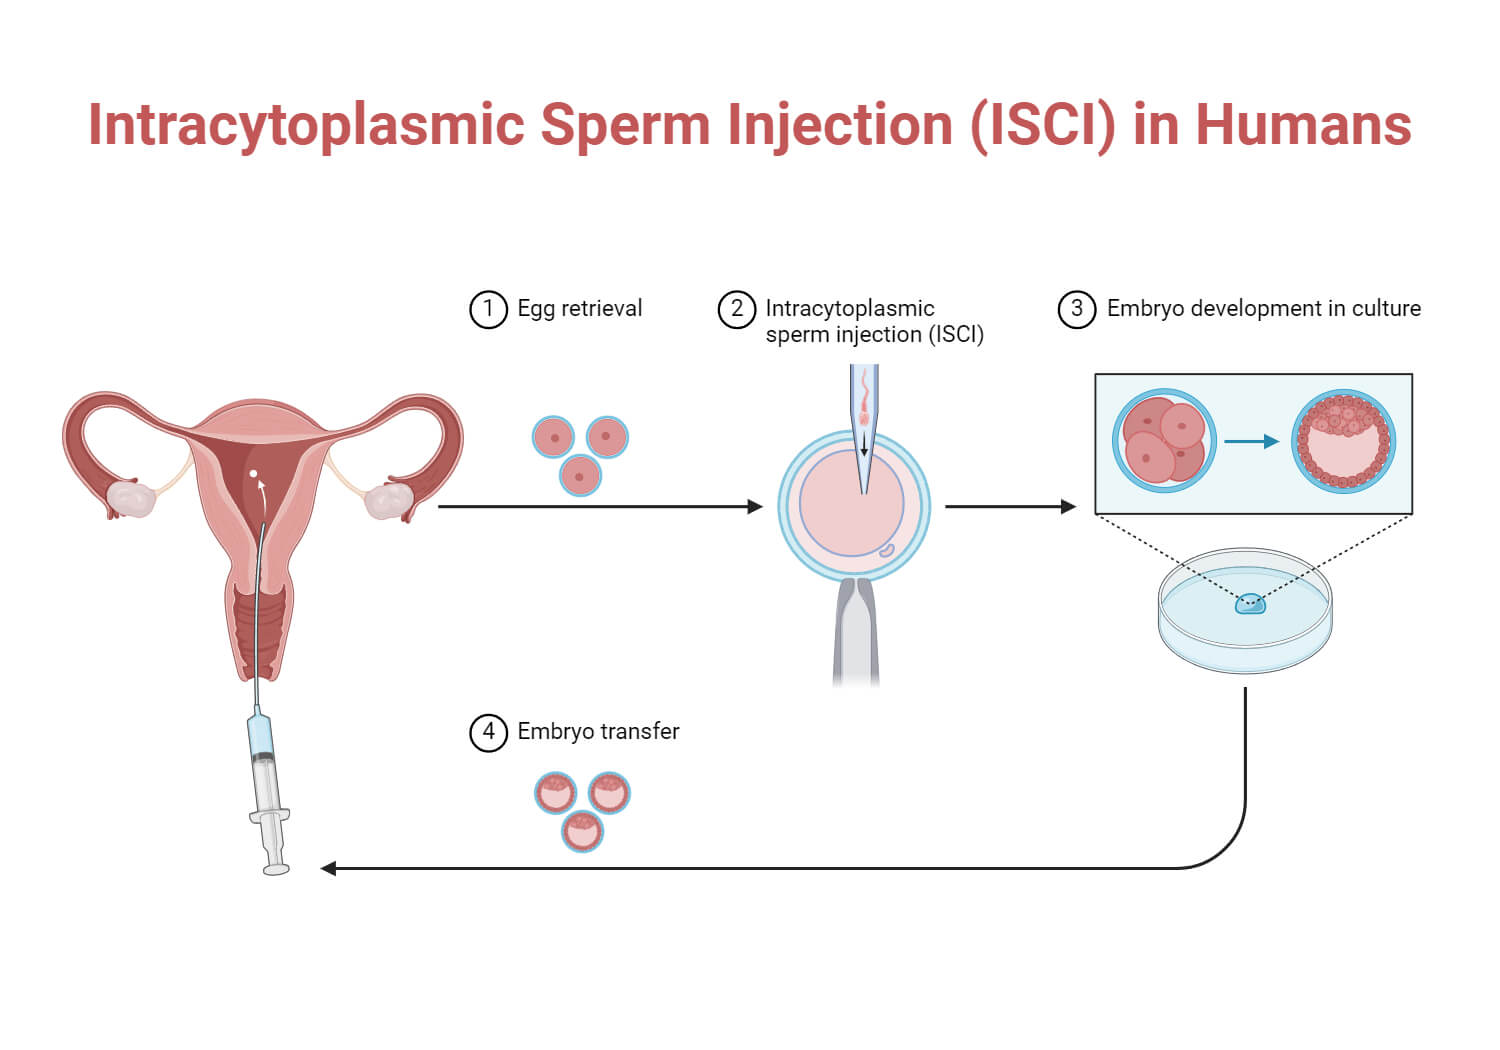 Intracytoplasmic Sperm Injection (ISCI) in Humans